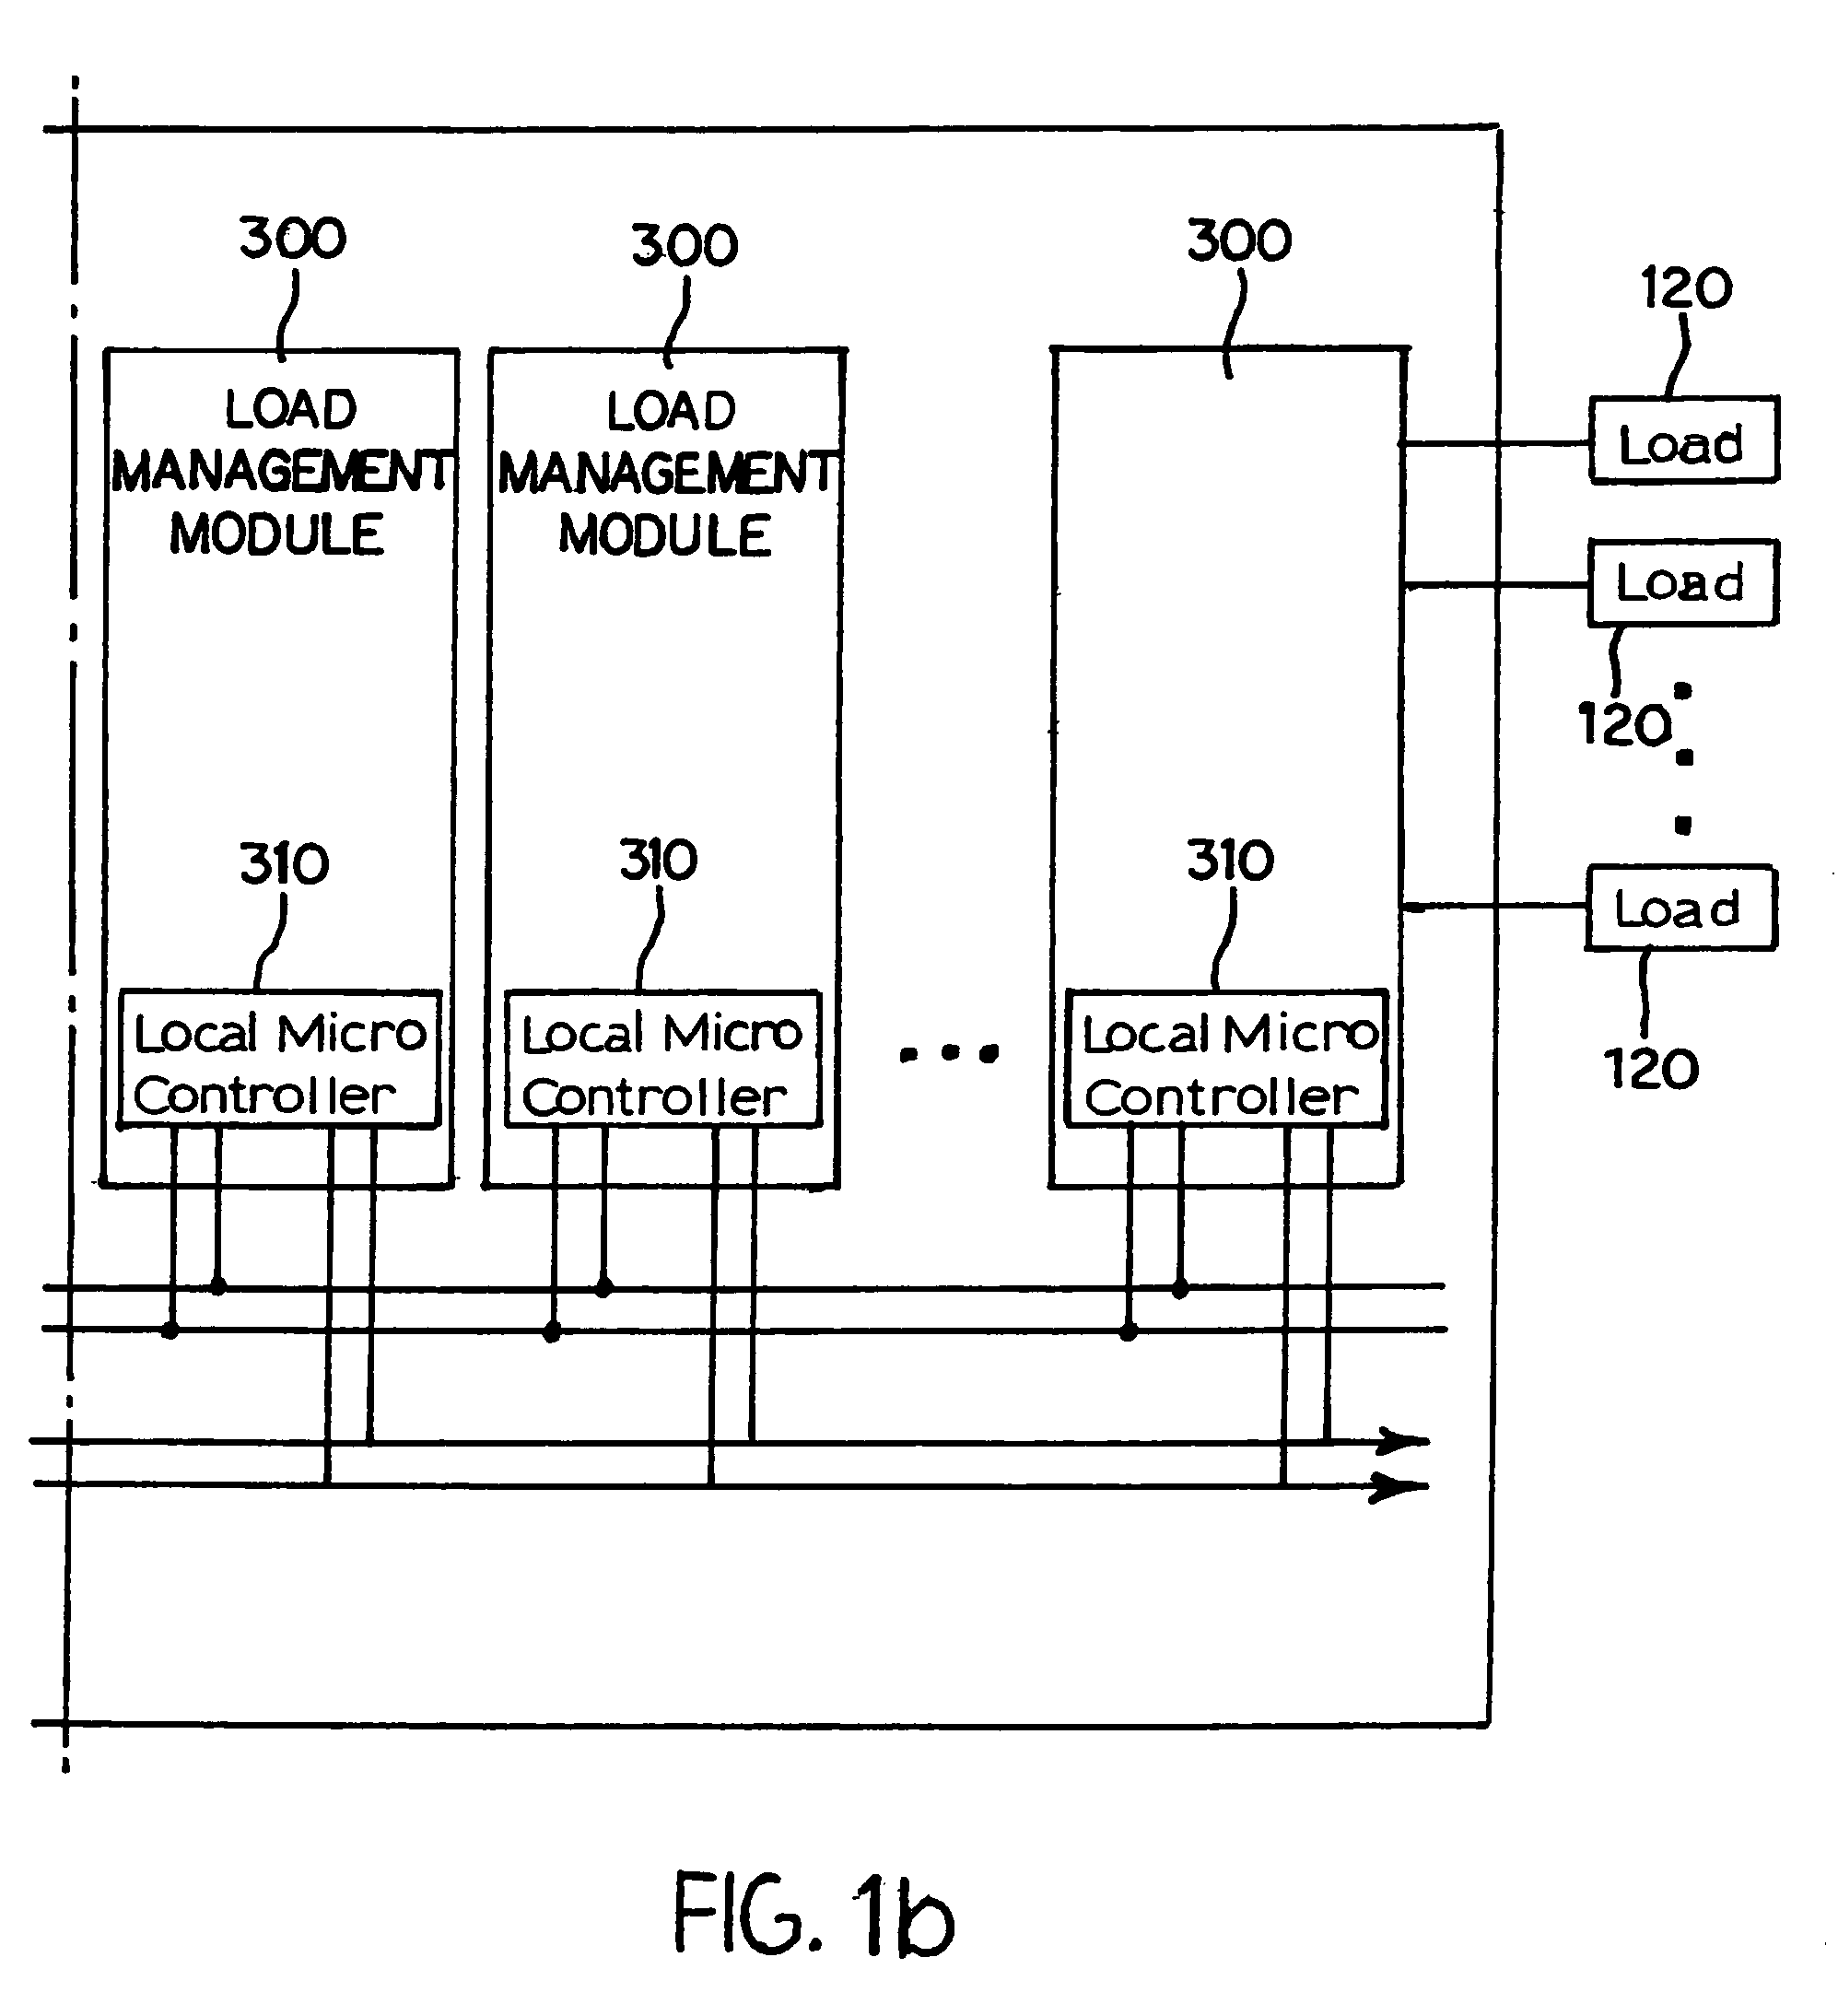 Electric power distribution center having a plurality of ASICS each with a voltage to frequency converter that use an RMS current value